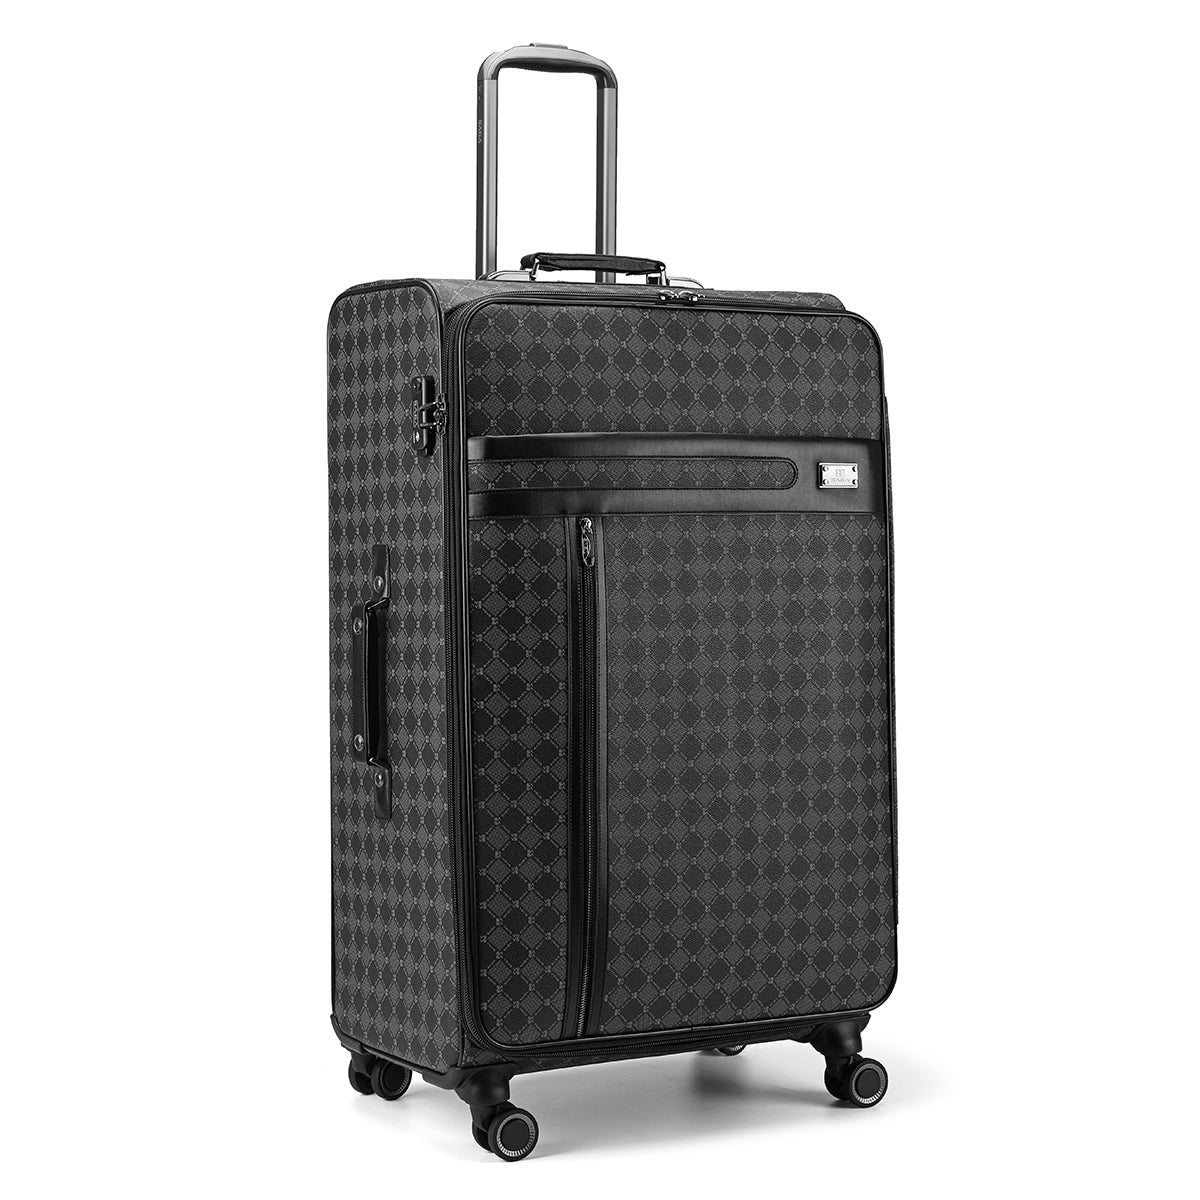 Luxury travel bags available in three sizes, gray colour